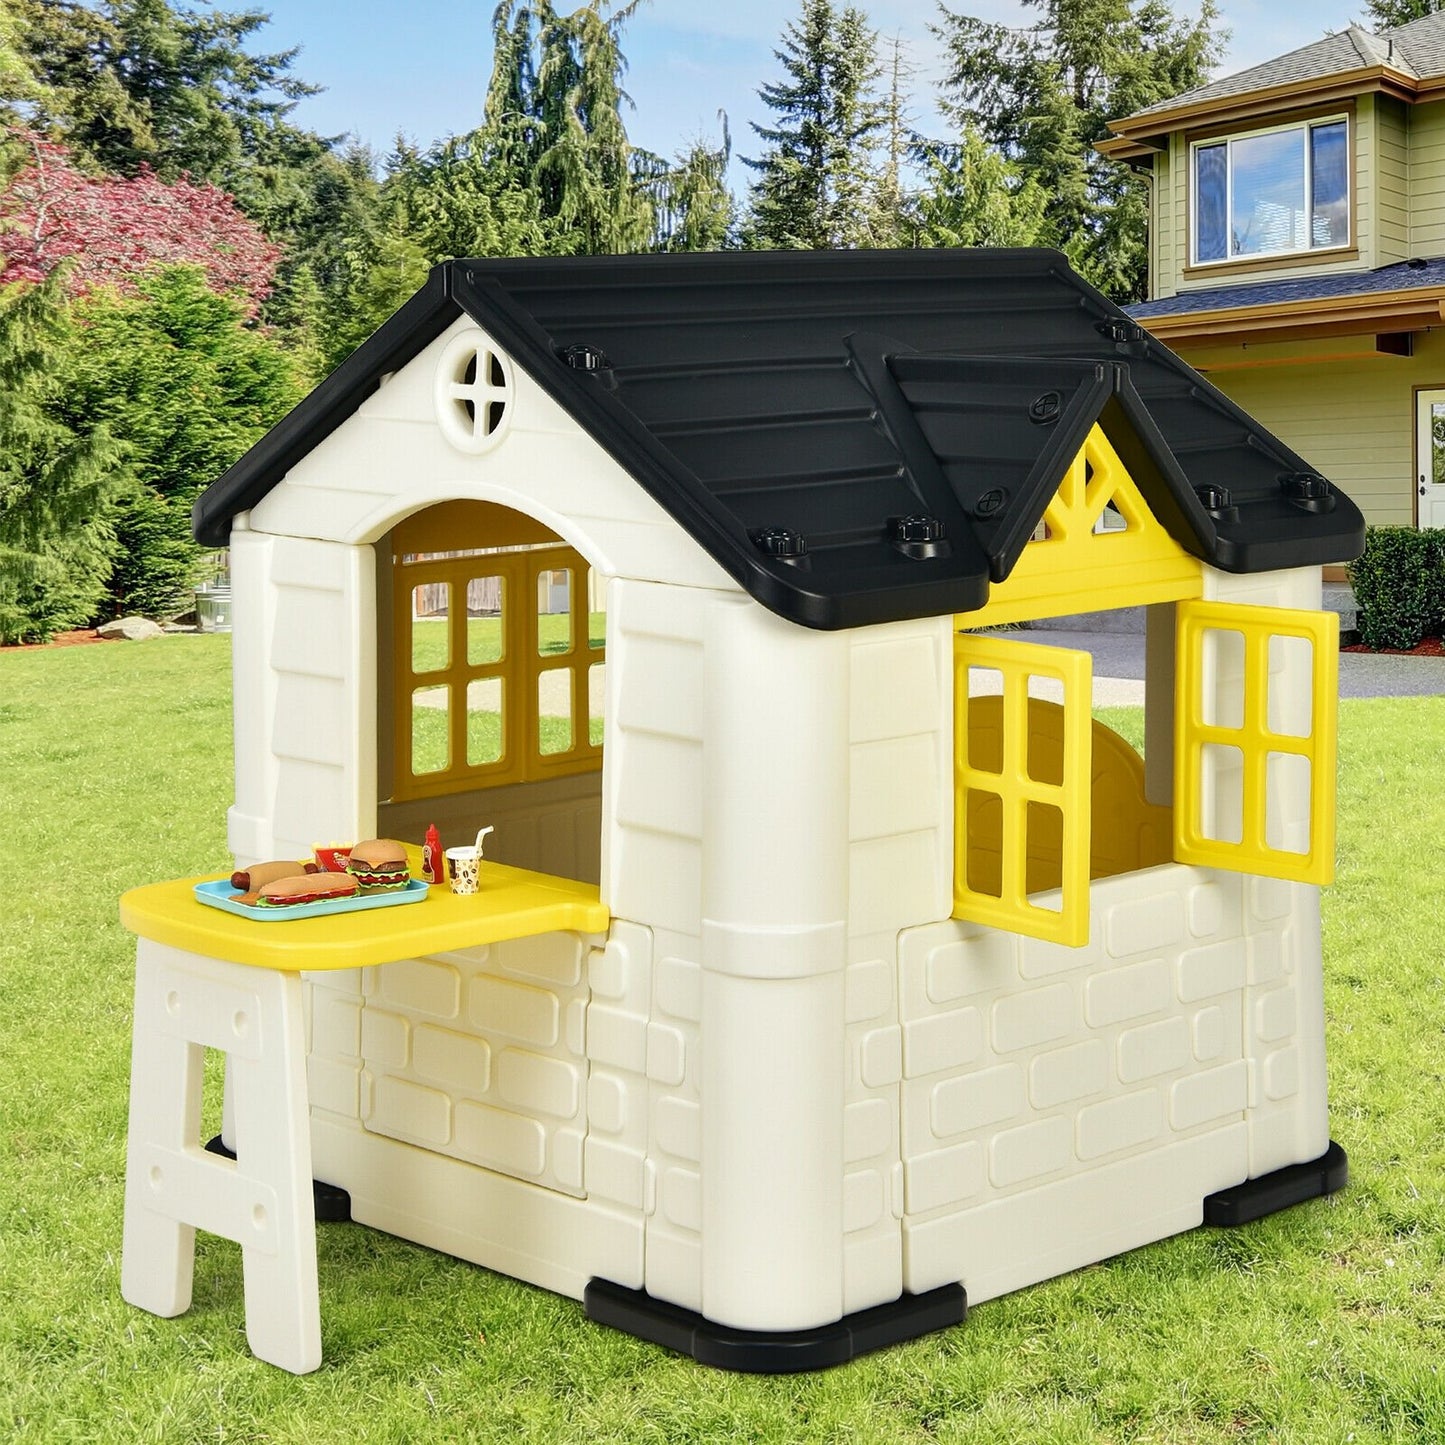 Kid’s Playhouse Pretend Toy House For Boys and Girls 7 Pieces Toy Set, Yellow